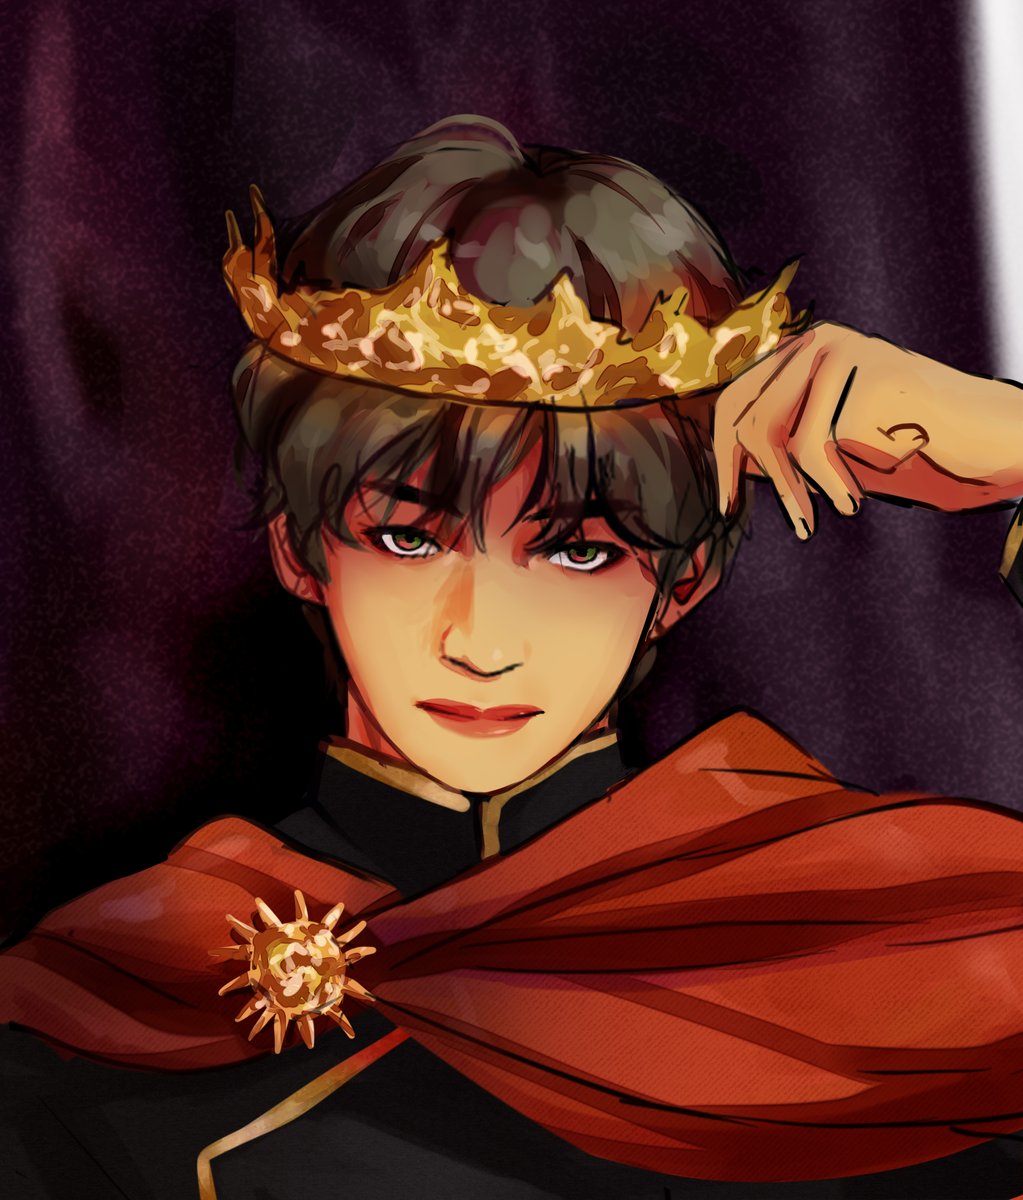 Taehyung- A beautiful and devilish boy king who became king after the assassination of his parents. He hates everything about being the ruler of the kingdom and would rather spend days on end playing his lyre.